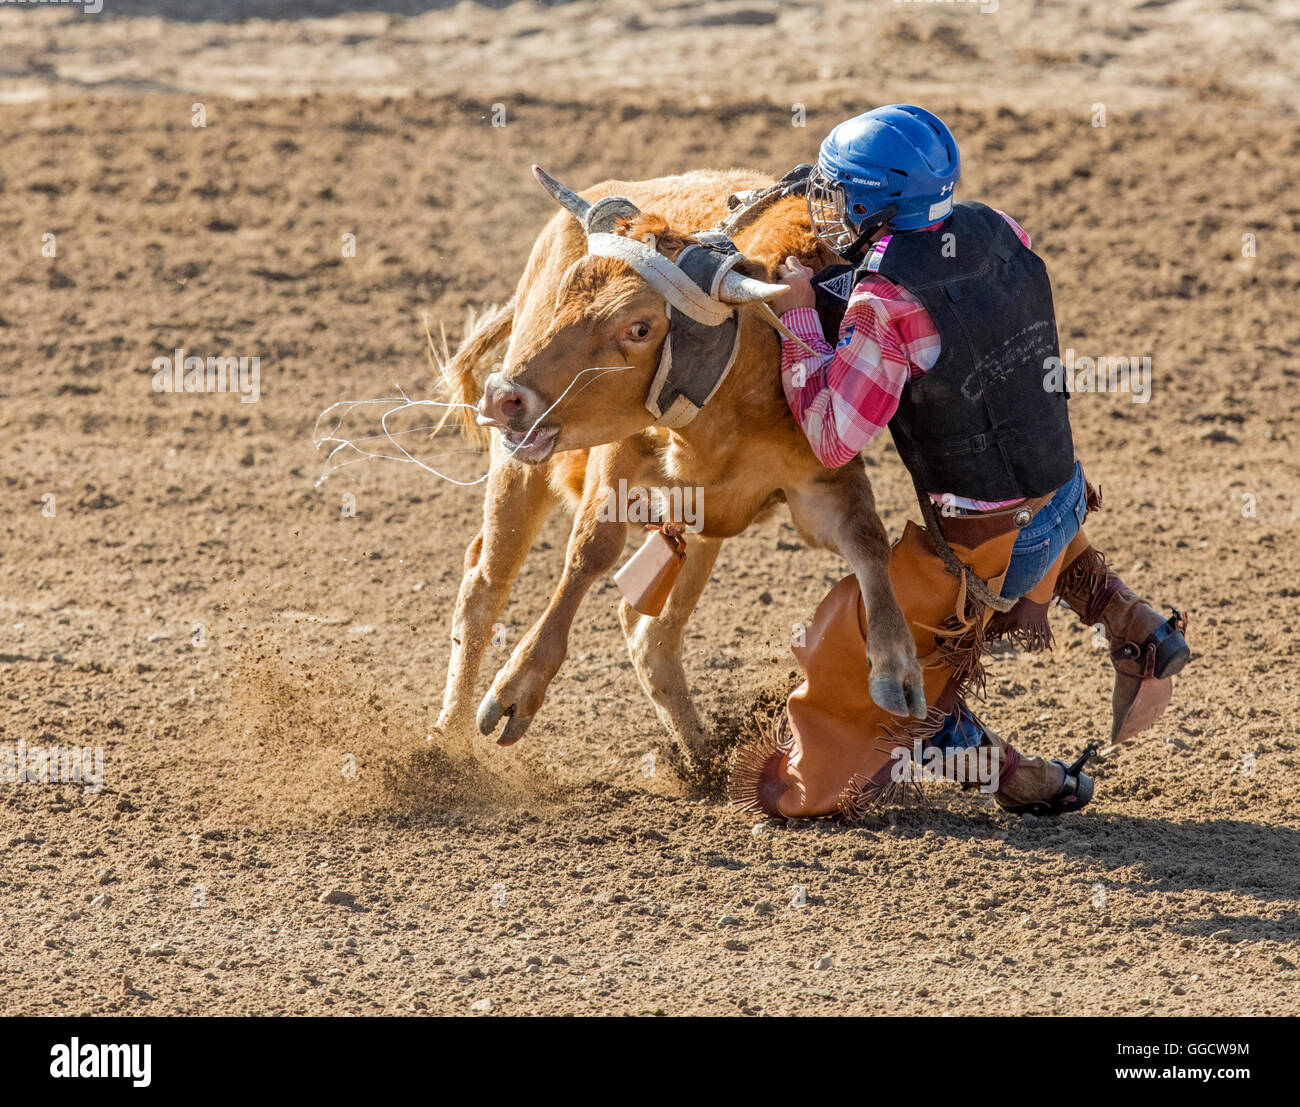 Young cowboy riding a small bull in the Junior Steer Riding competition, Chaffee County Fair & Rodeo, Salida, Colorado, USA Stock Photo